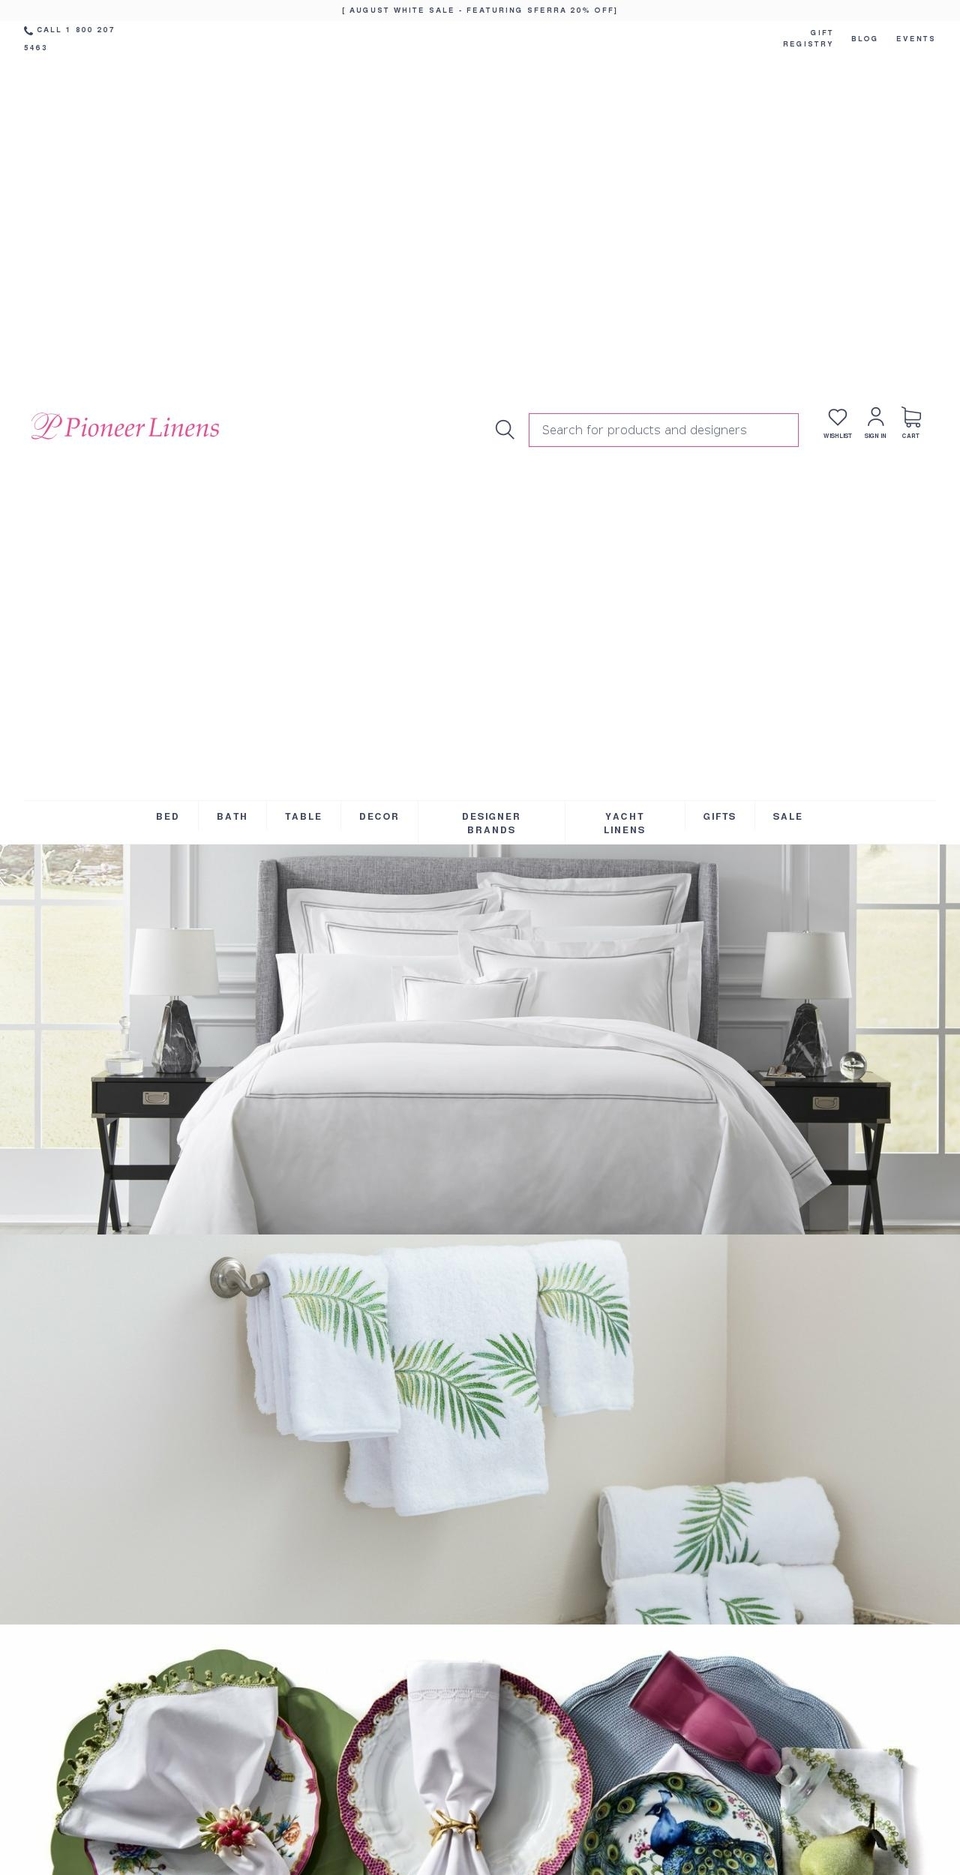 Buko Shopify Theme - Products Consolidation Shopify theme site example piomeerlinens.com